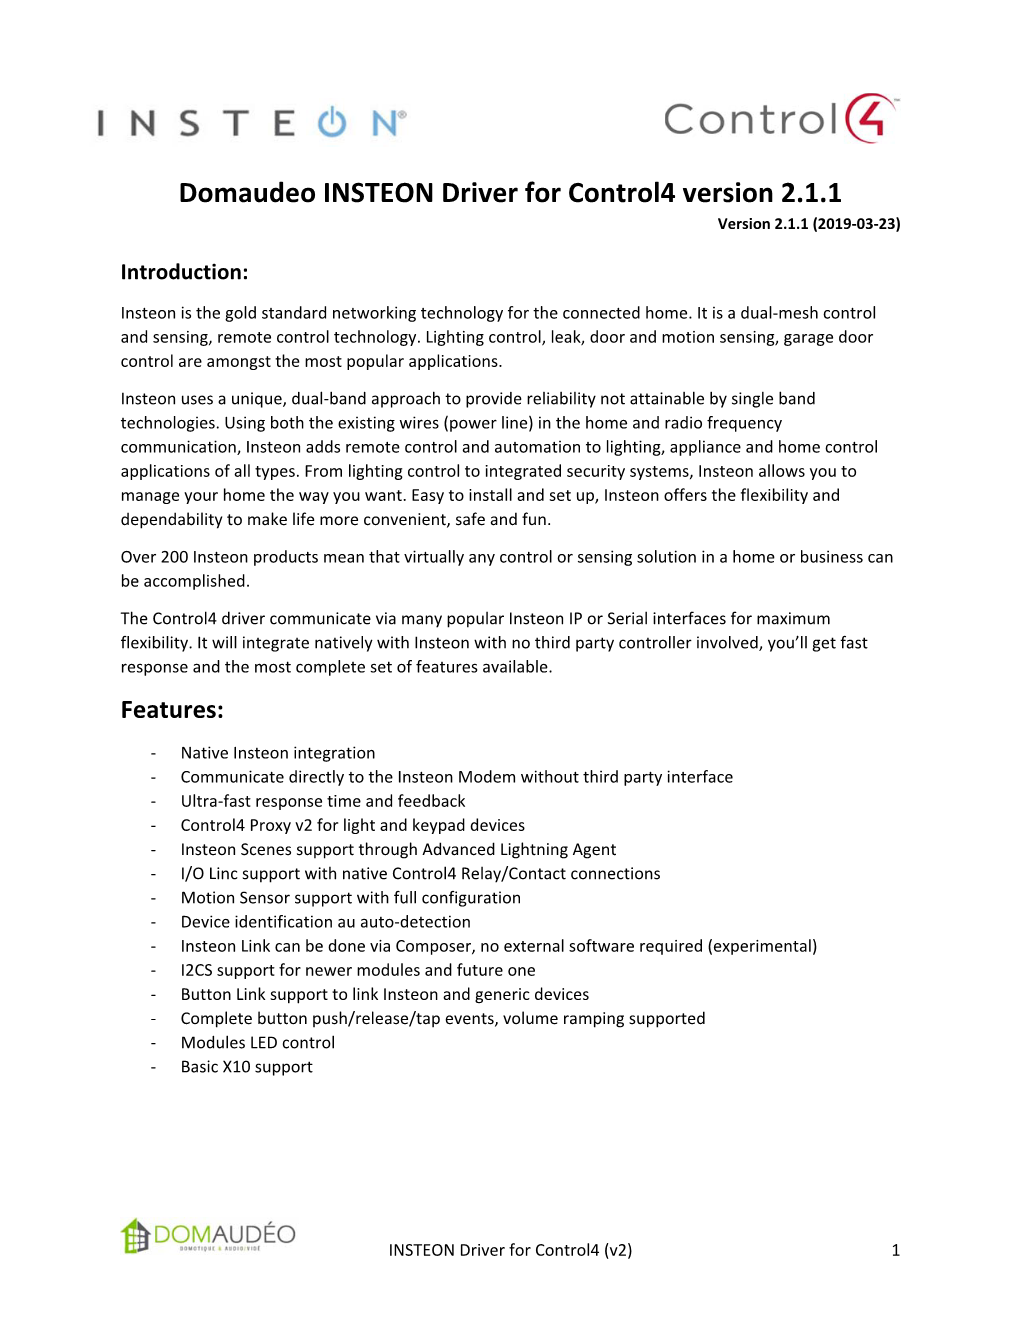 Domaudeo INSTEON Driver for Control4 Version 2.1.1 Version 2.1.1 (2019‐03‐23)